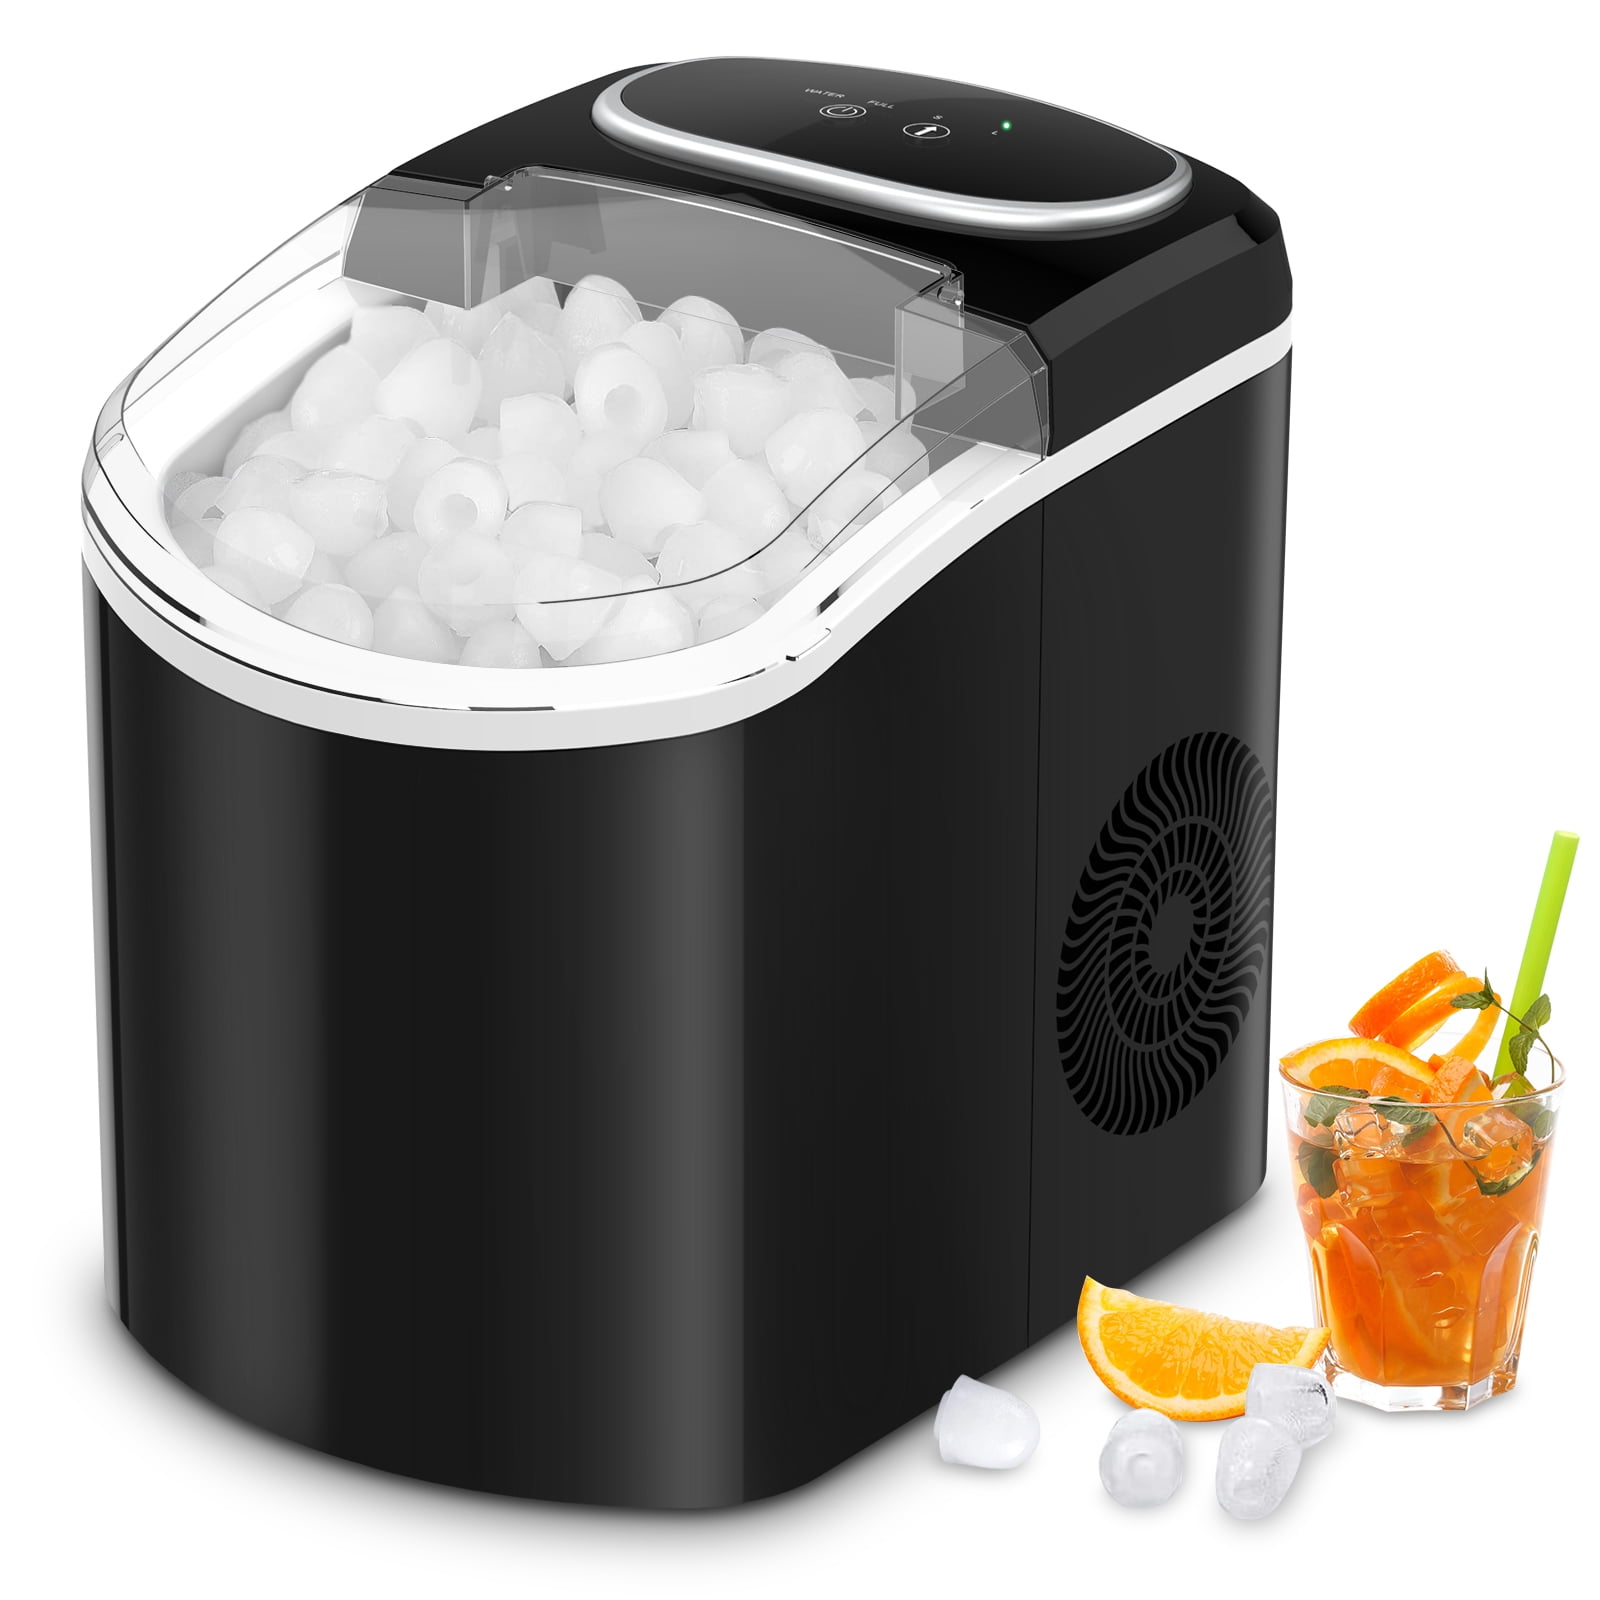 Tavata Portable Automatic Ice Maker Machine with Self-clean Function for Countertop Black 9 Ice Cubes ready in 8 Minutes,Makes 26 lbs of Ice per 24 hours,with See-through Lid,LED Lights 